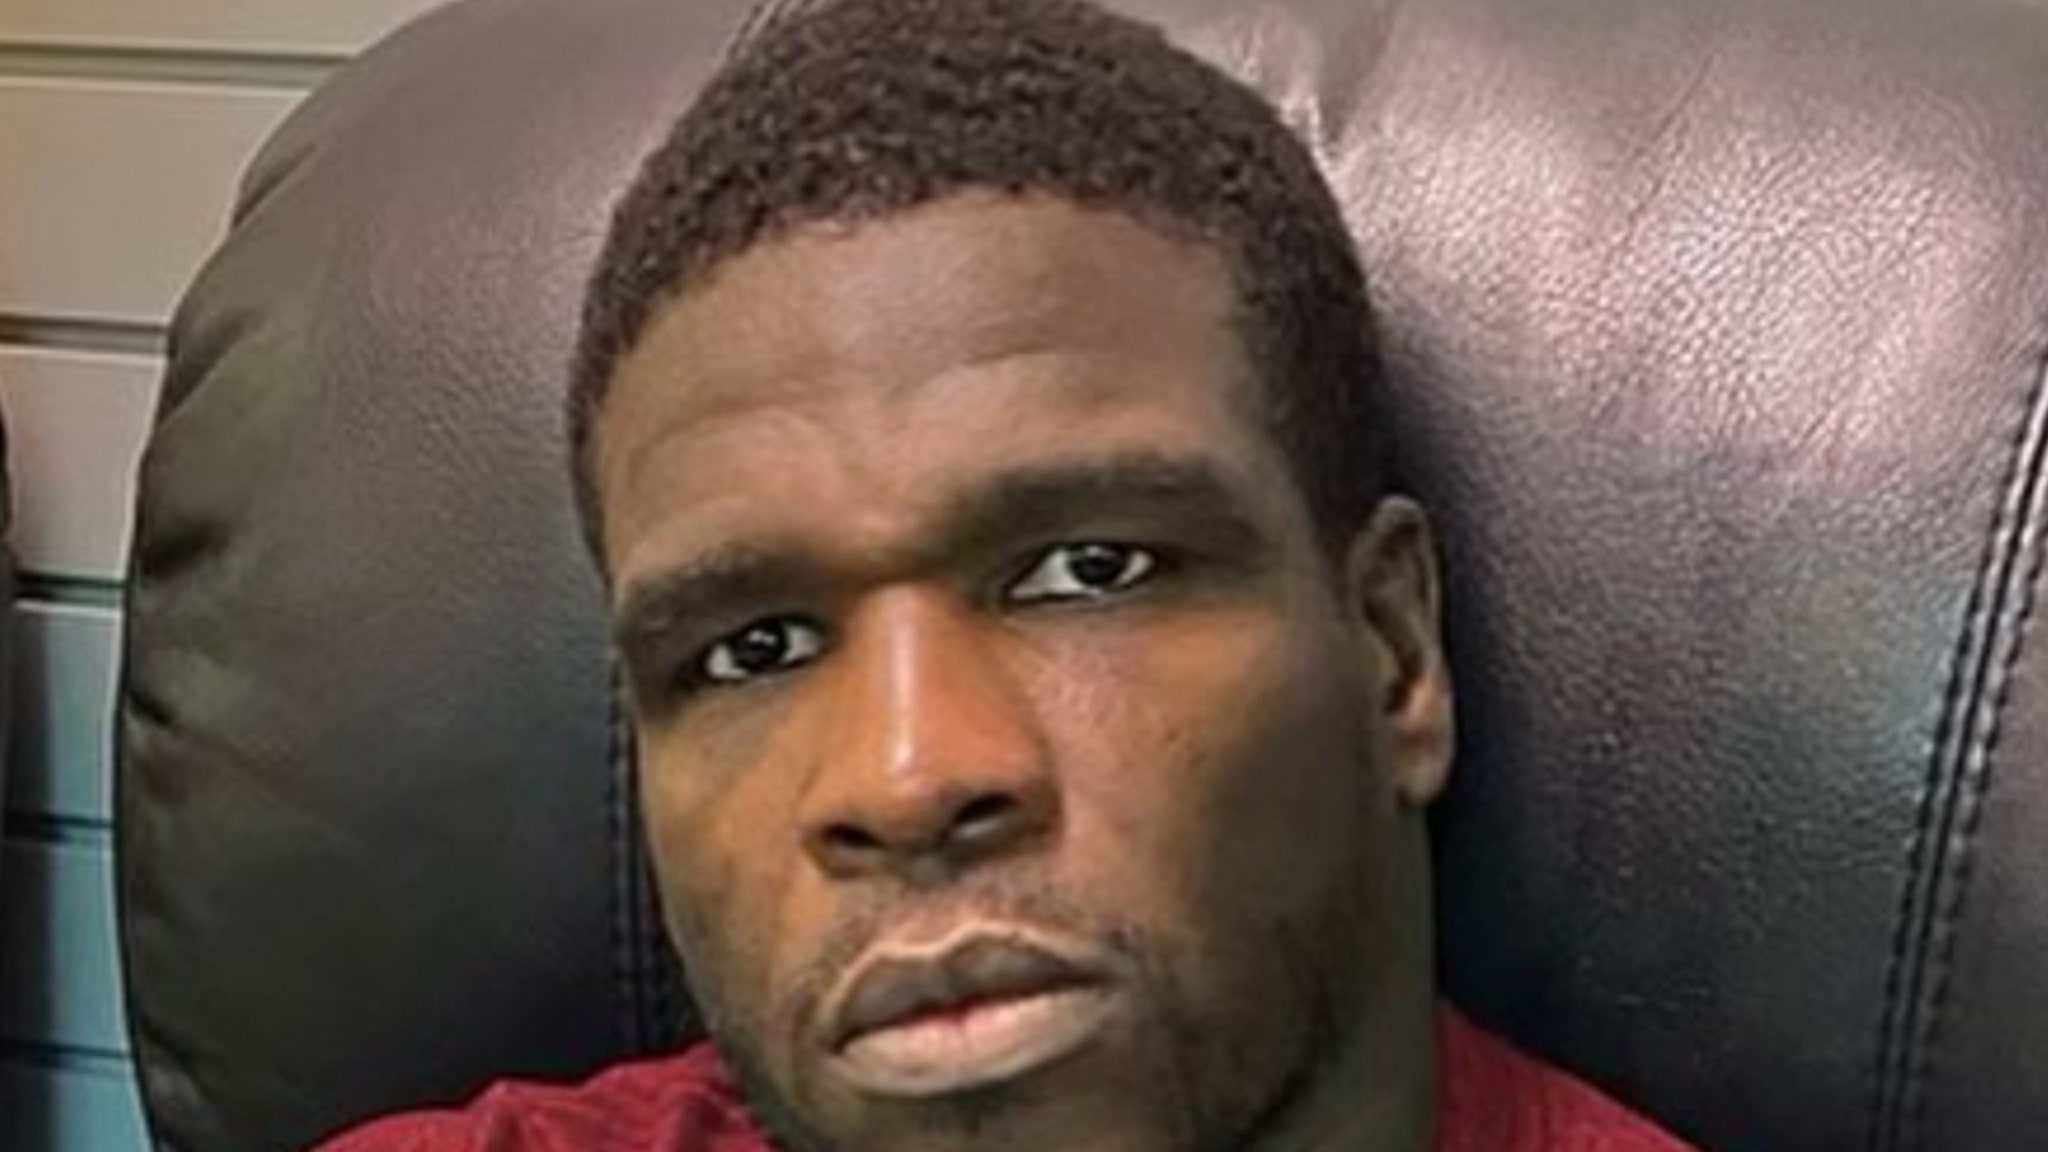 Frank Gore Dragged Bare Lady Throughout Hallway By means of Her Hair, Police officers Say